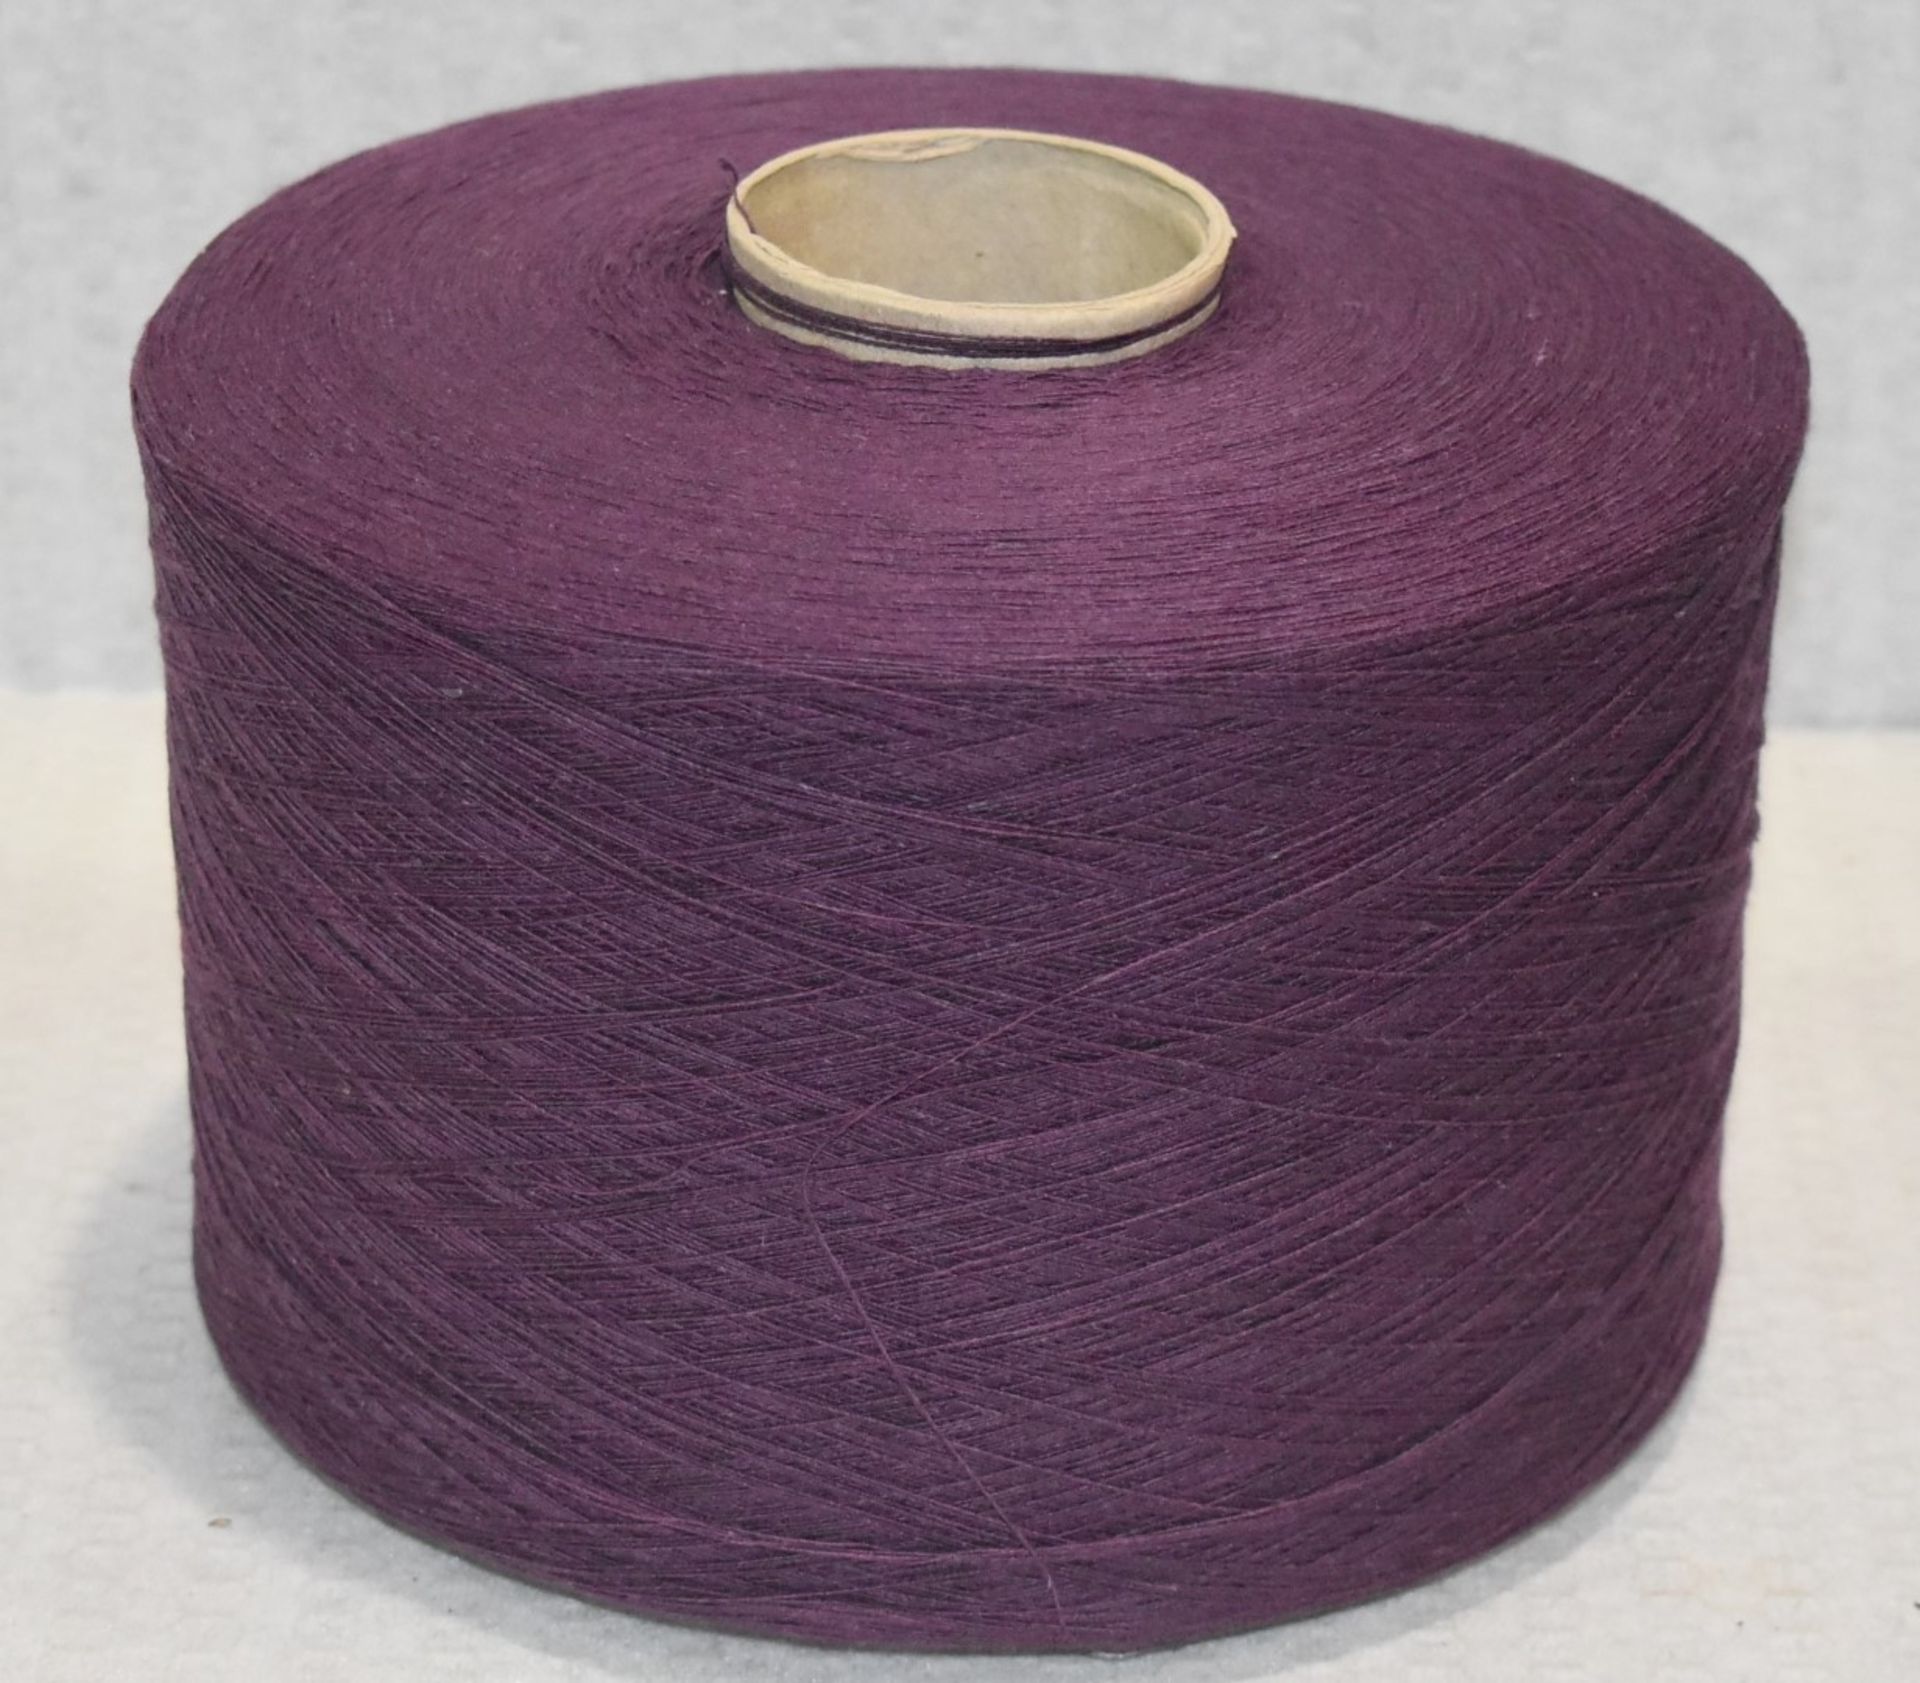 6 x Cones of 1/13 MicroCotton Knitting Yarn - Purple - Approx Weight: 2,300g - New Stock ABL Yarn - Image 2 of 9